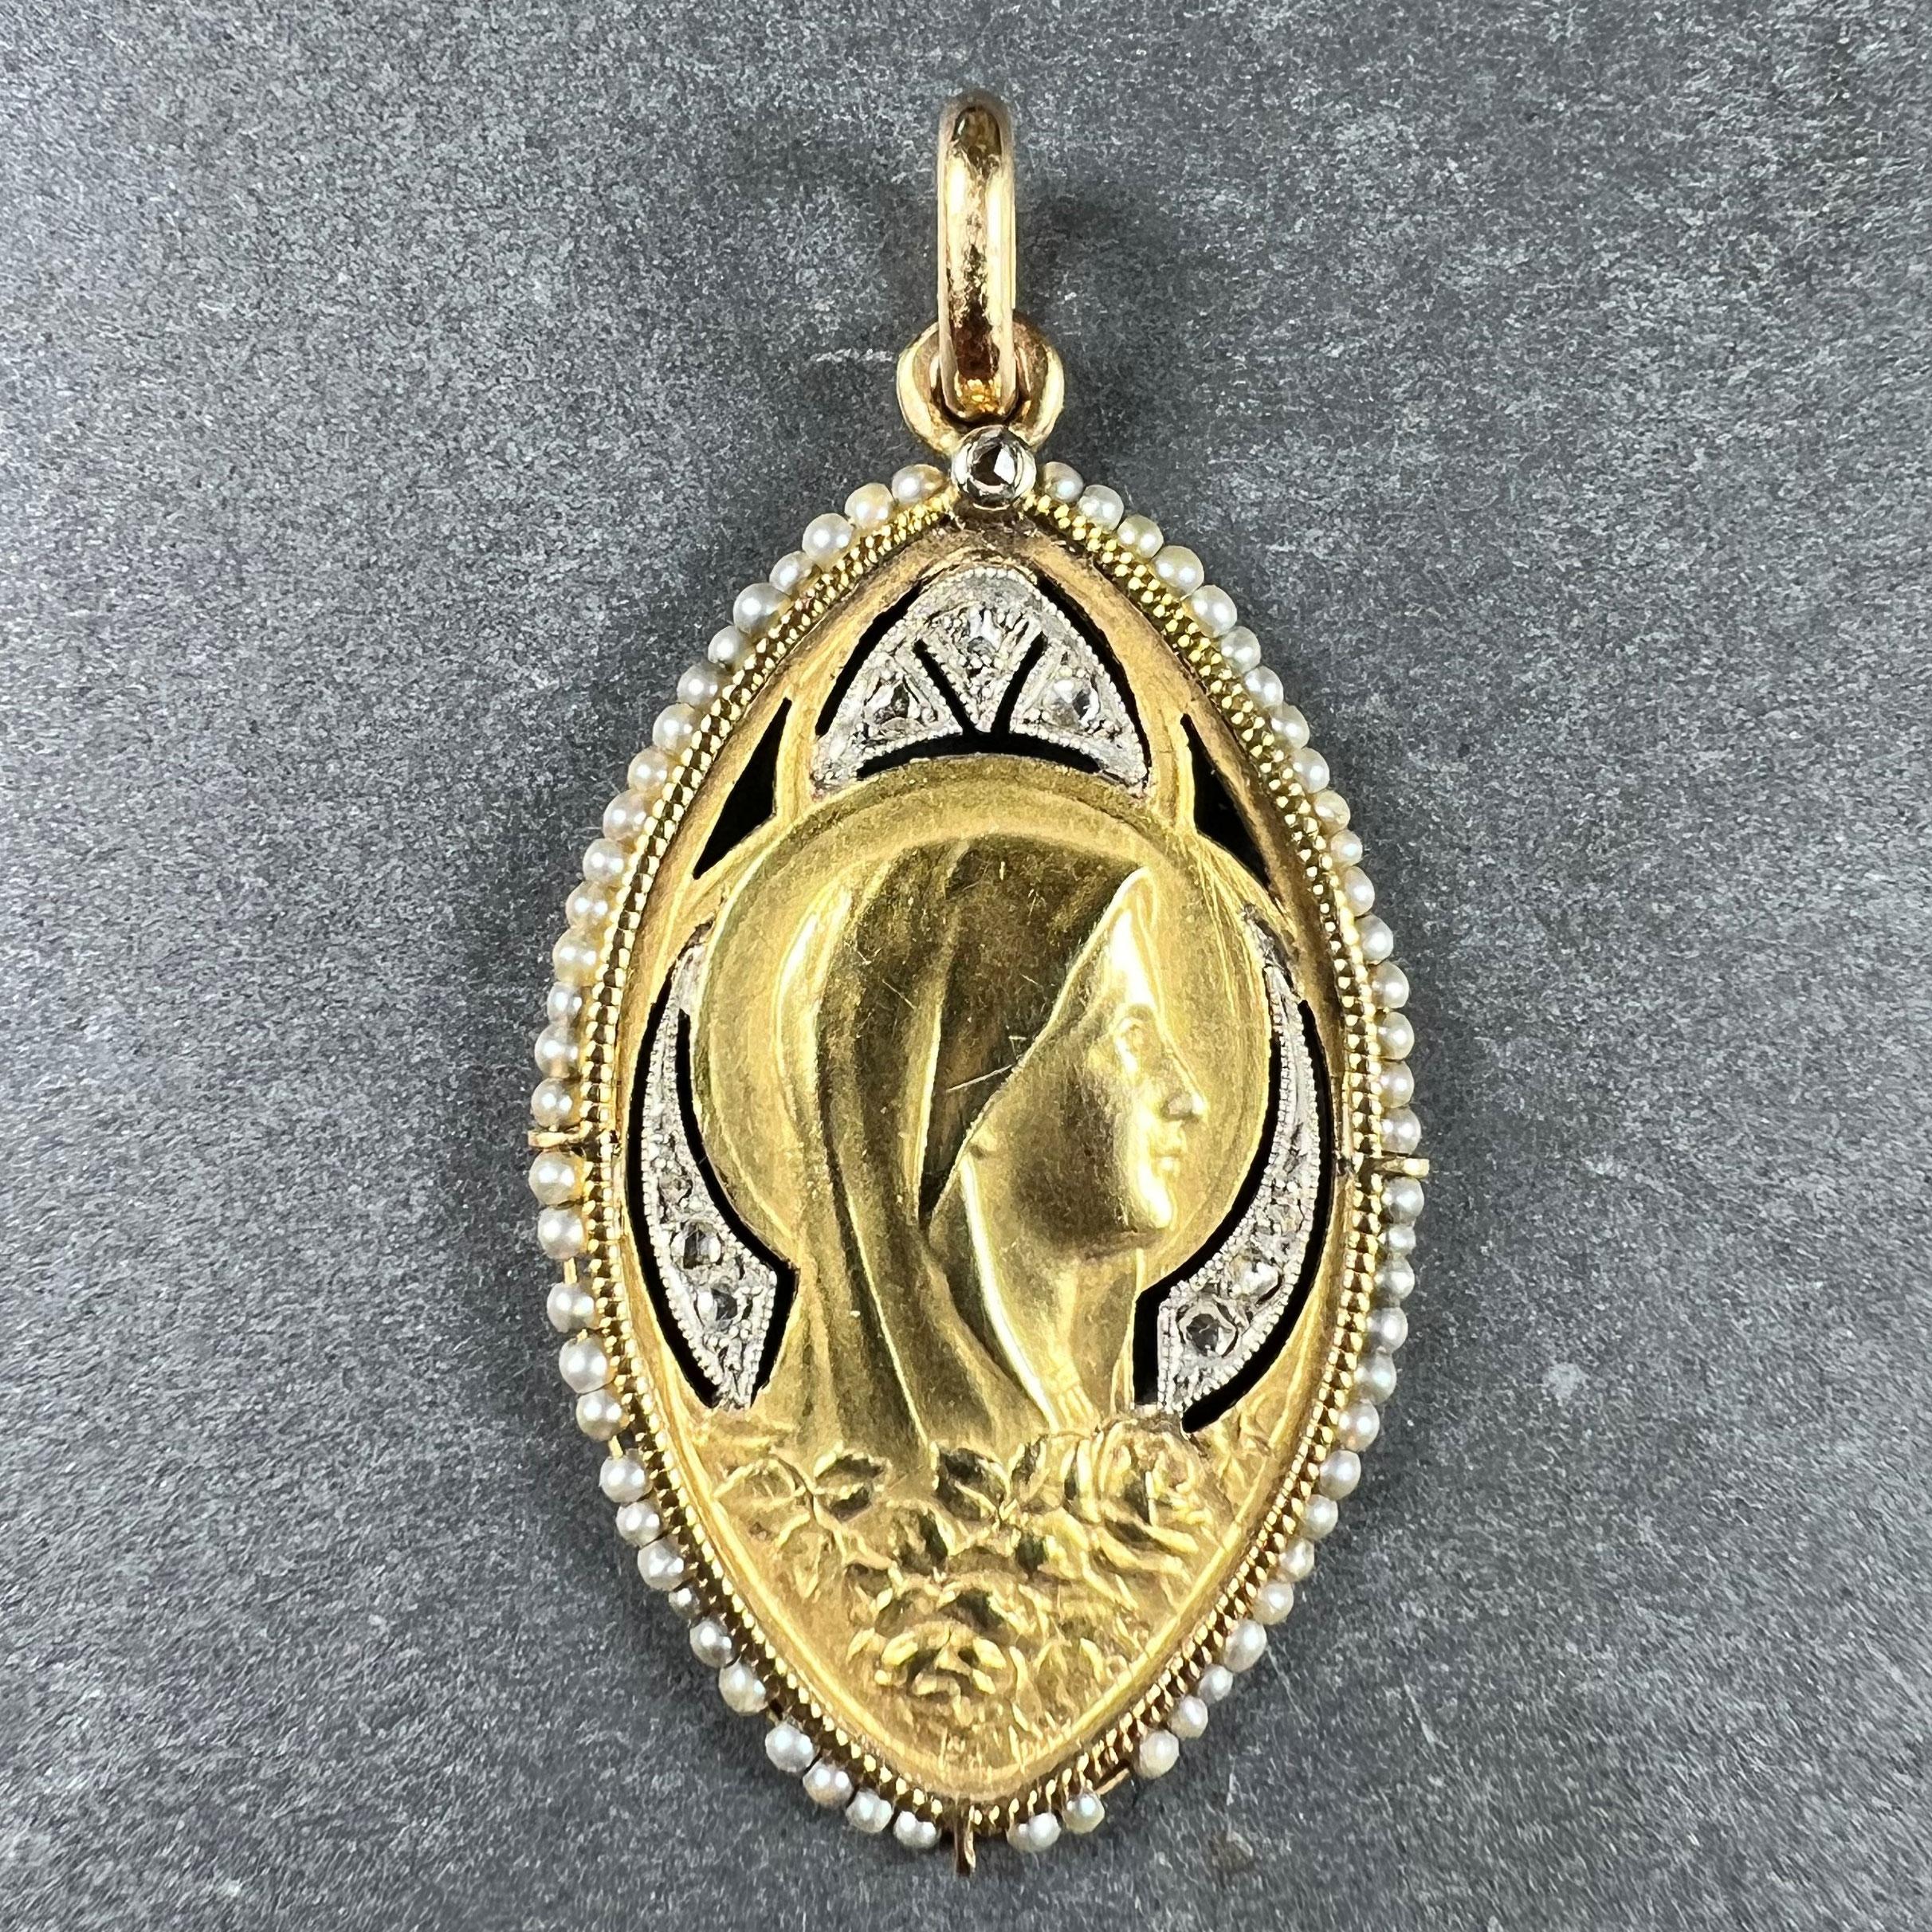 An 18 karat (18K) yellow gold pendant designed as a navette or elongated oval medal representing the Virgin Mary with a halo above a bank of roses, surrounded by 9 rose-cut diamonds set in silver-topped gold,  surrounded by 64 natural white seed